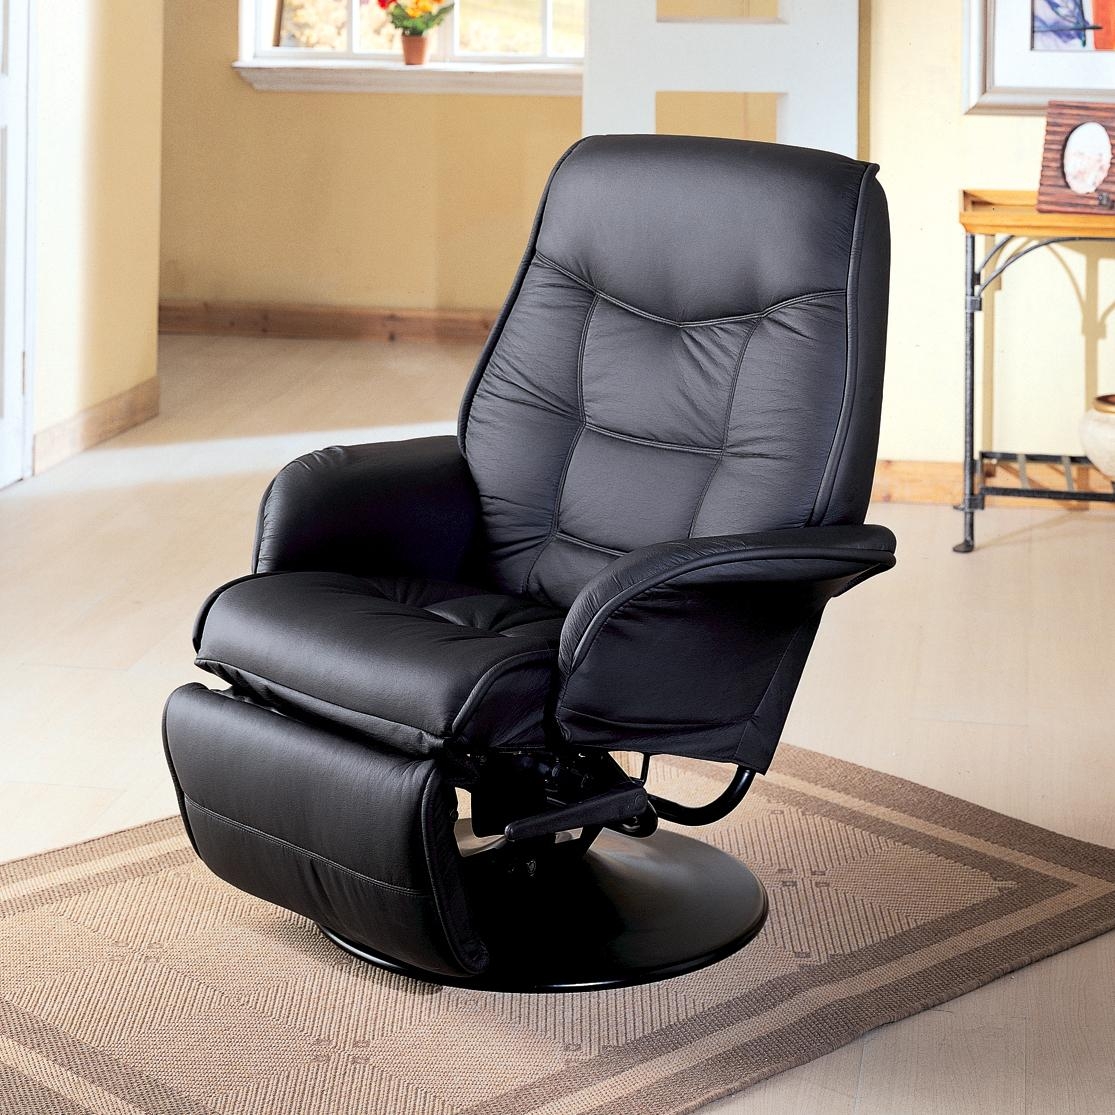 Most Comfortable Recliners Visualhunt, Leather Rocker Recliner Chairs